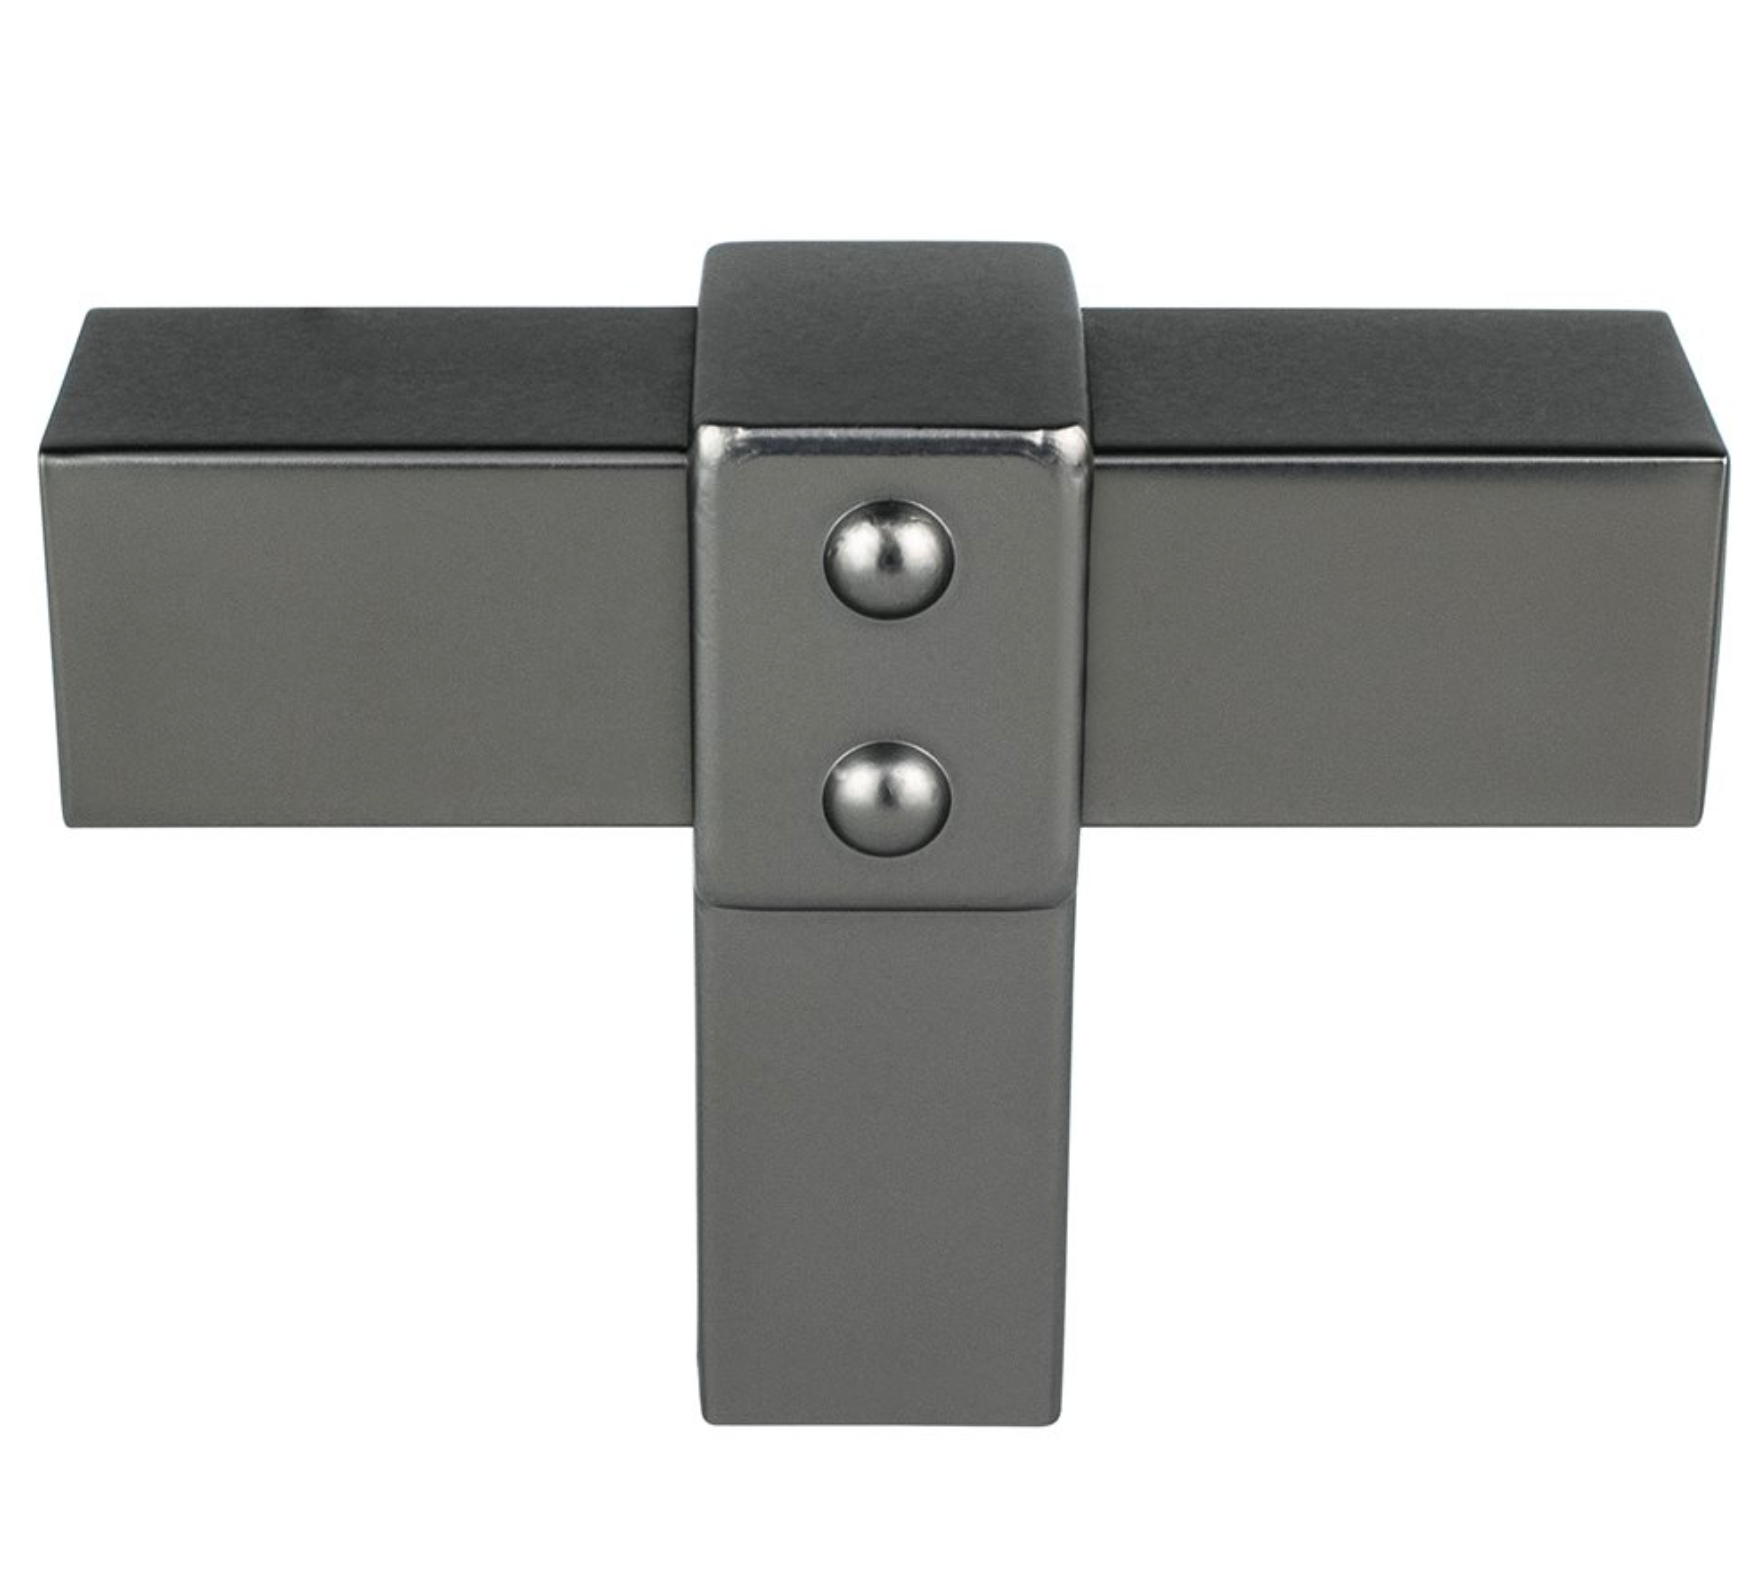 Ash Gray "Rio" T-Bar Cabinet Knob and Drawer Pulls - Industry Hardware